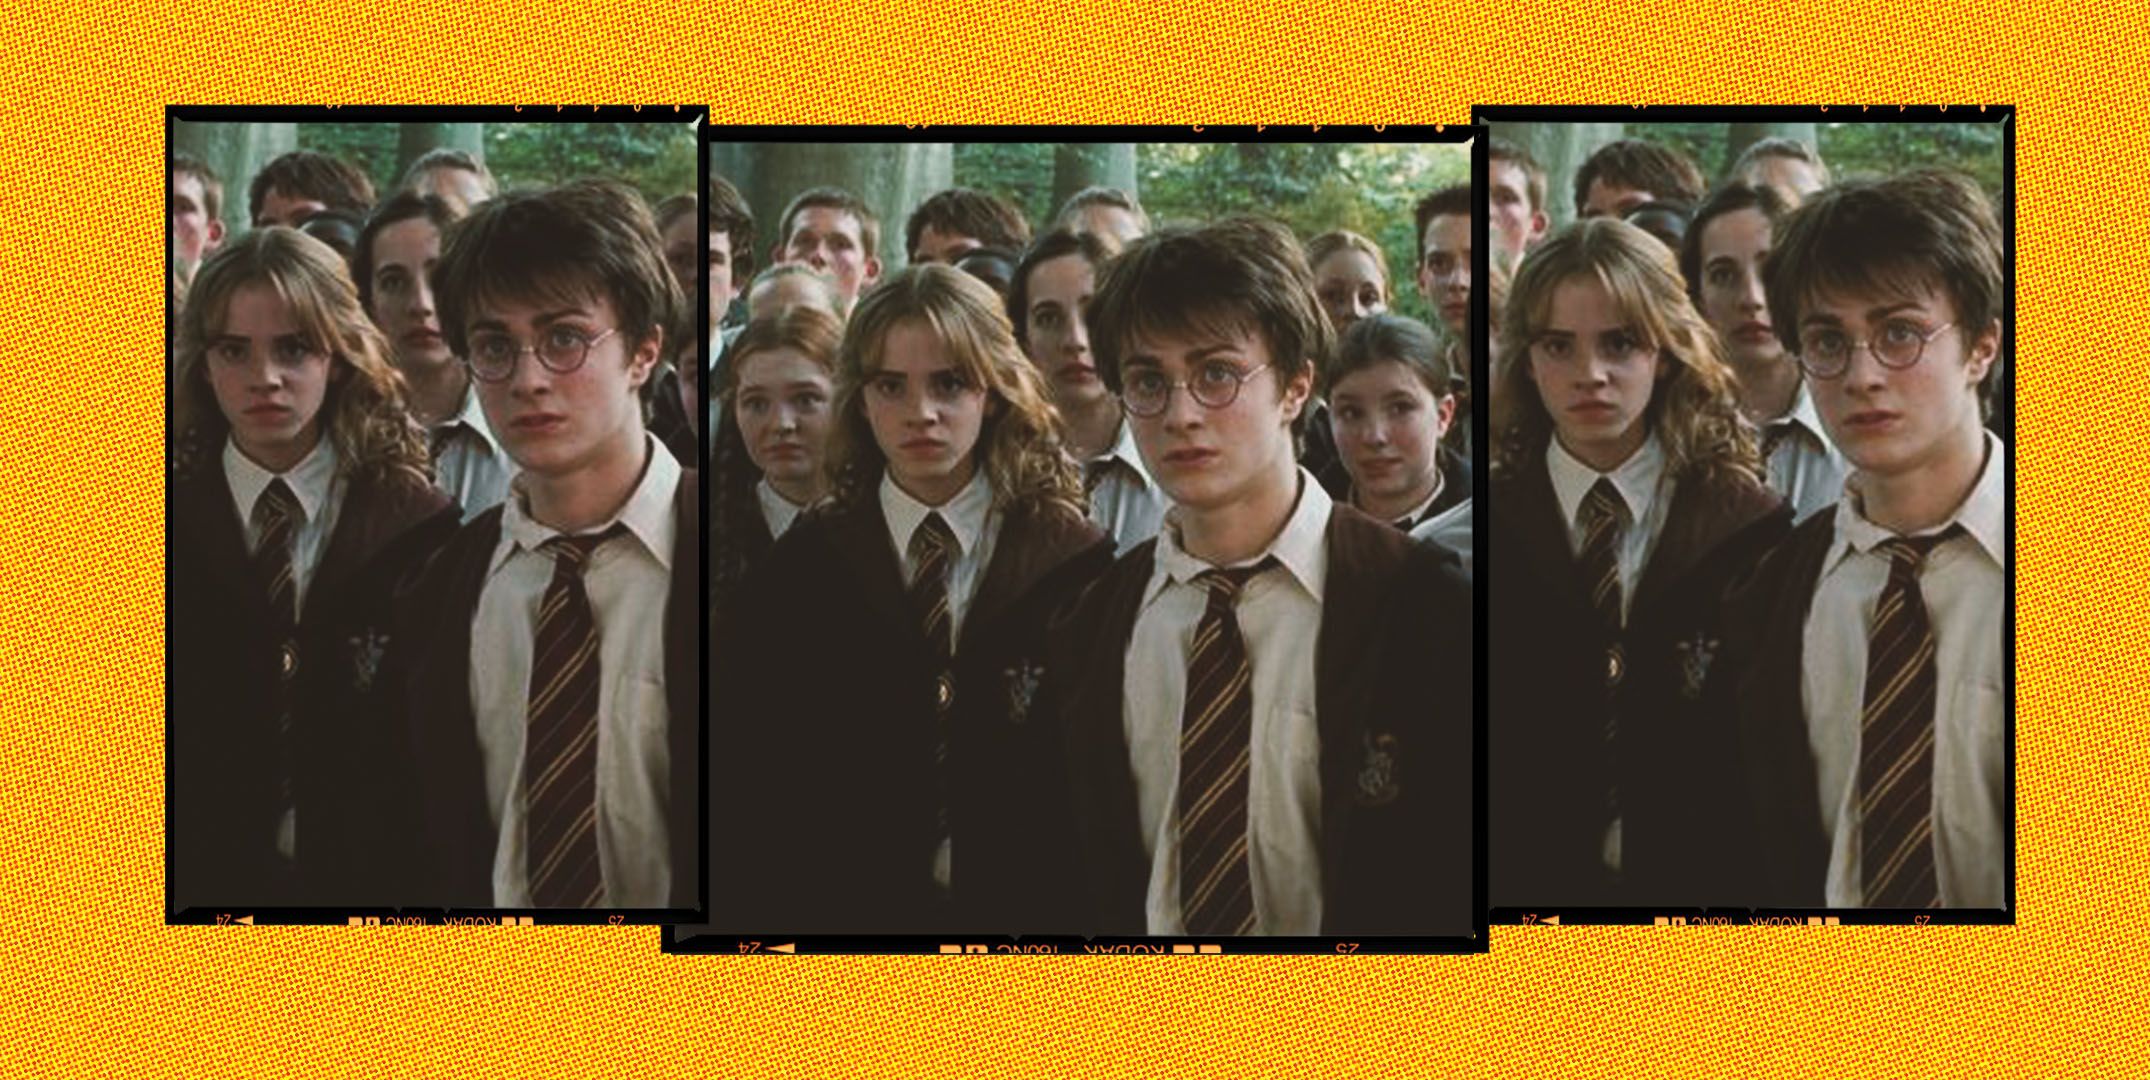 Harry Potter movies: How many are there?